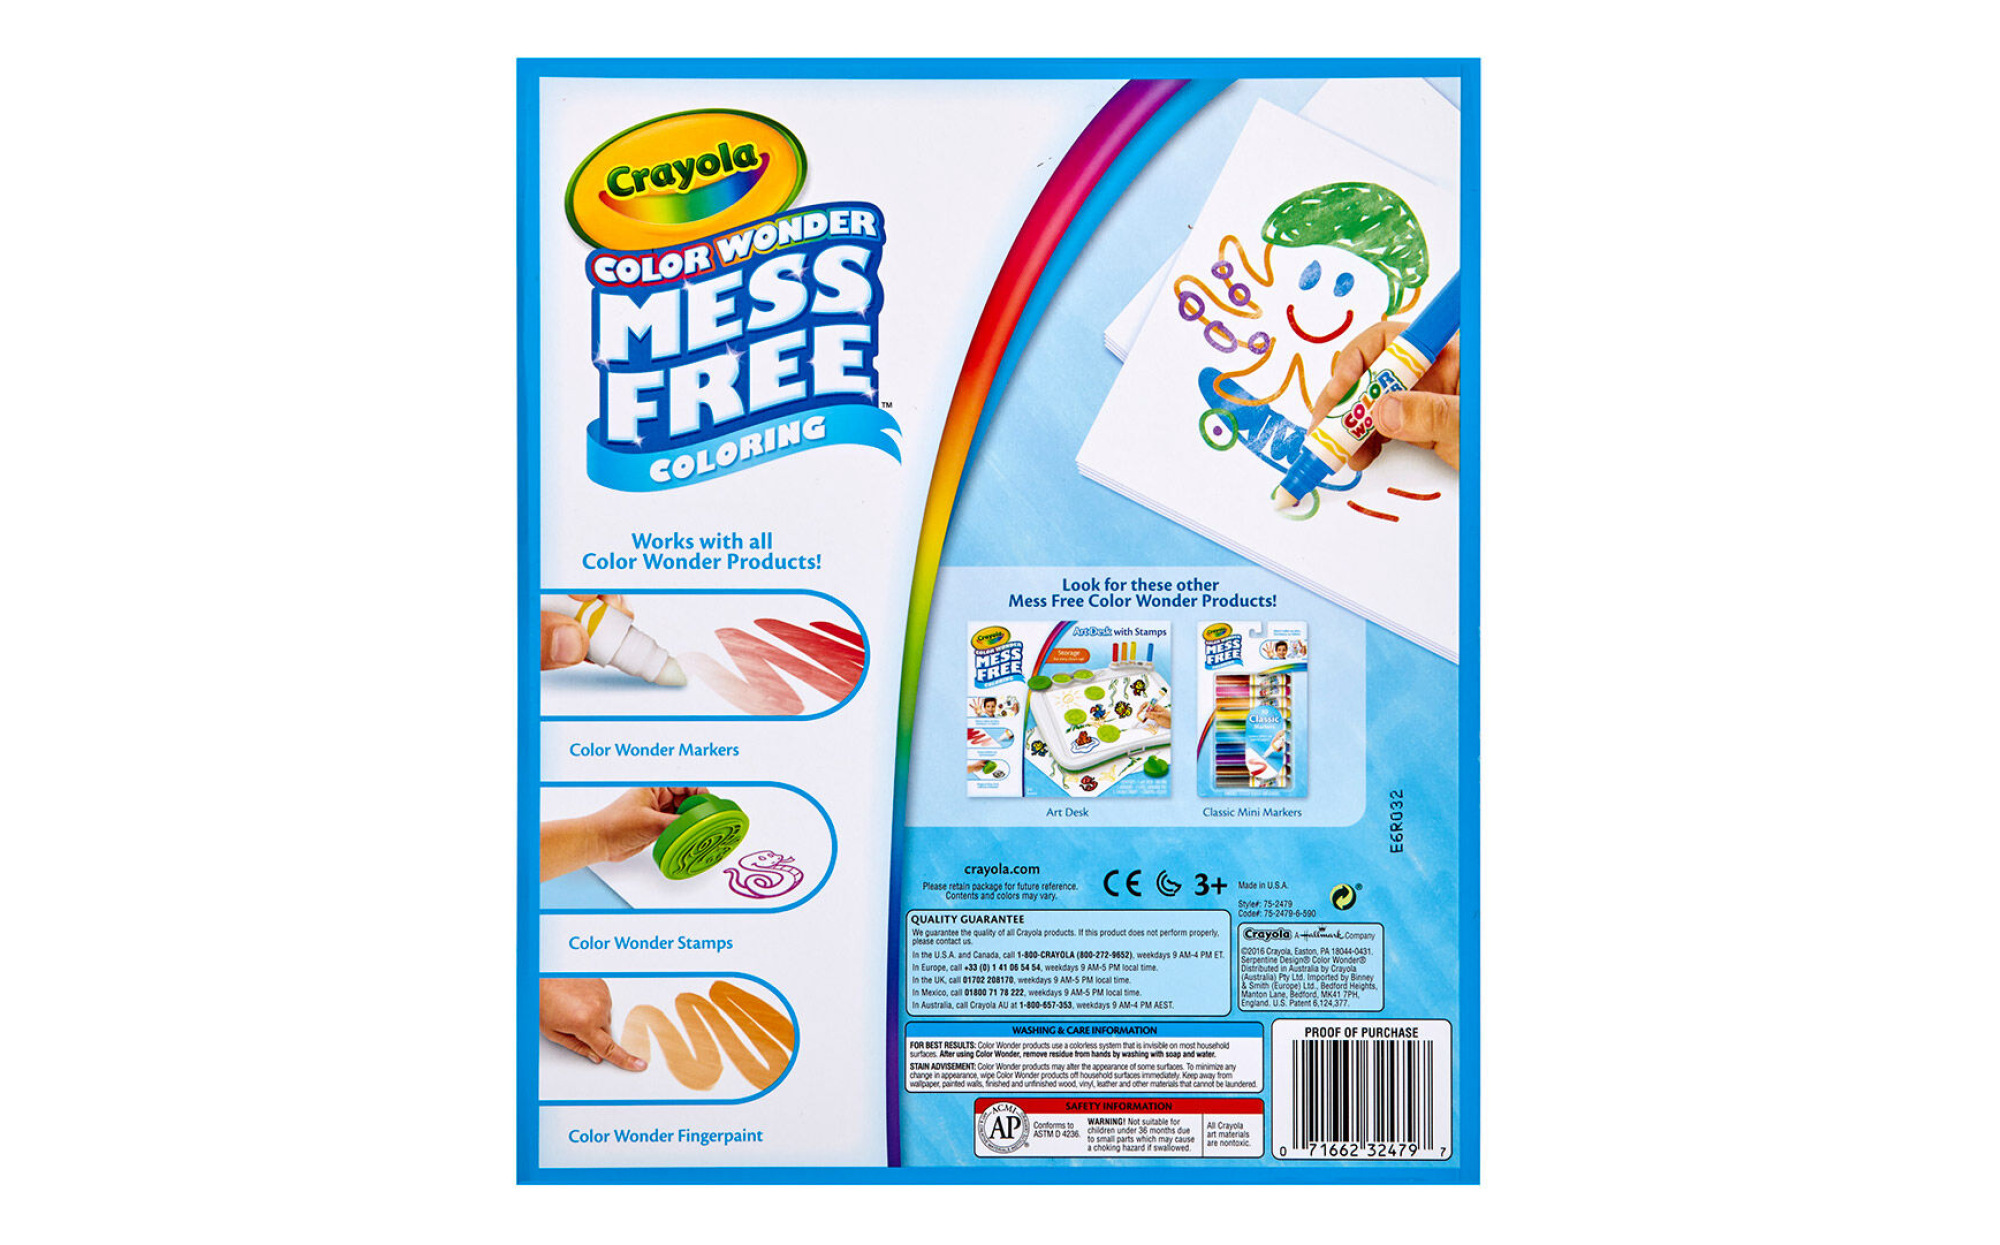  Crayola Color Wonder Mess Free Paintbrush Pens & Paper, Toddler  Painting Set, Arts And Crafts For Kids